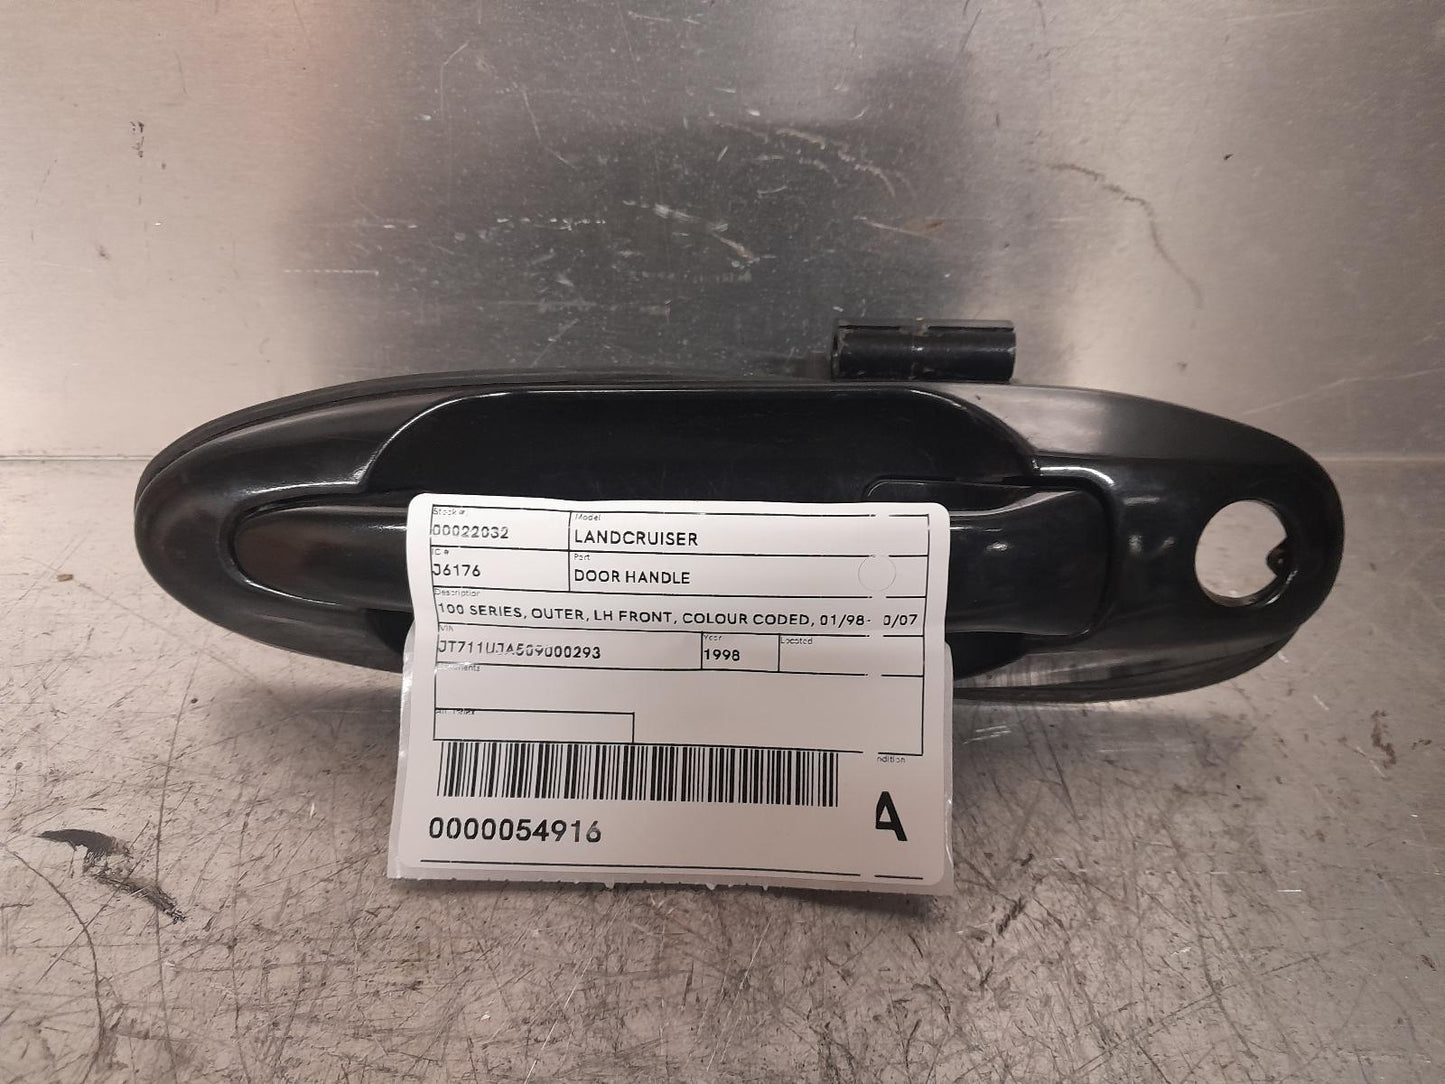 TOYOTA LANDCRUISER DOOR HANDLE 100 SERIES, OUTER, LH FRONT, COLOUR CODED, 01/98-10/07